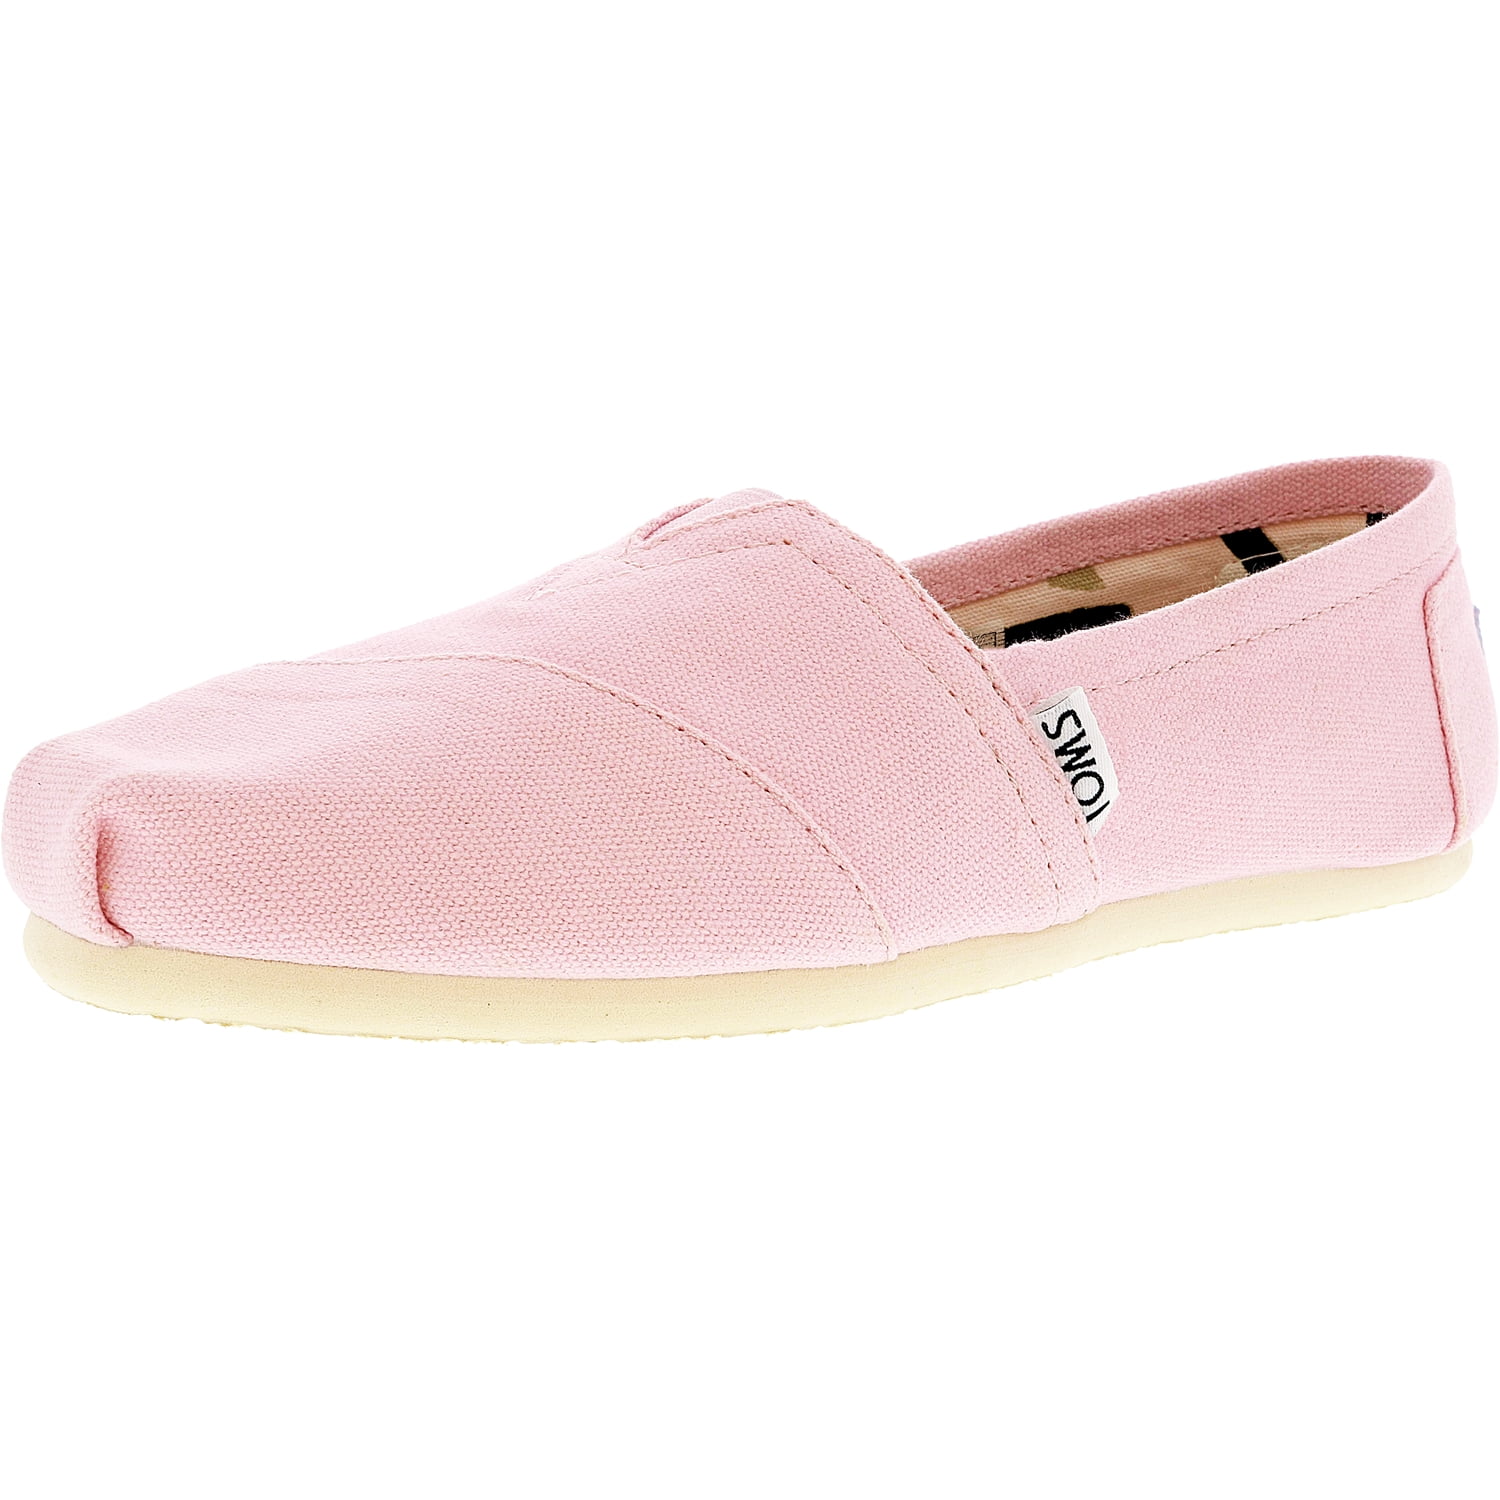 Toms Women's Classic Canvas Pink Icing Ankle-High Flat Shoe - 9M ...